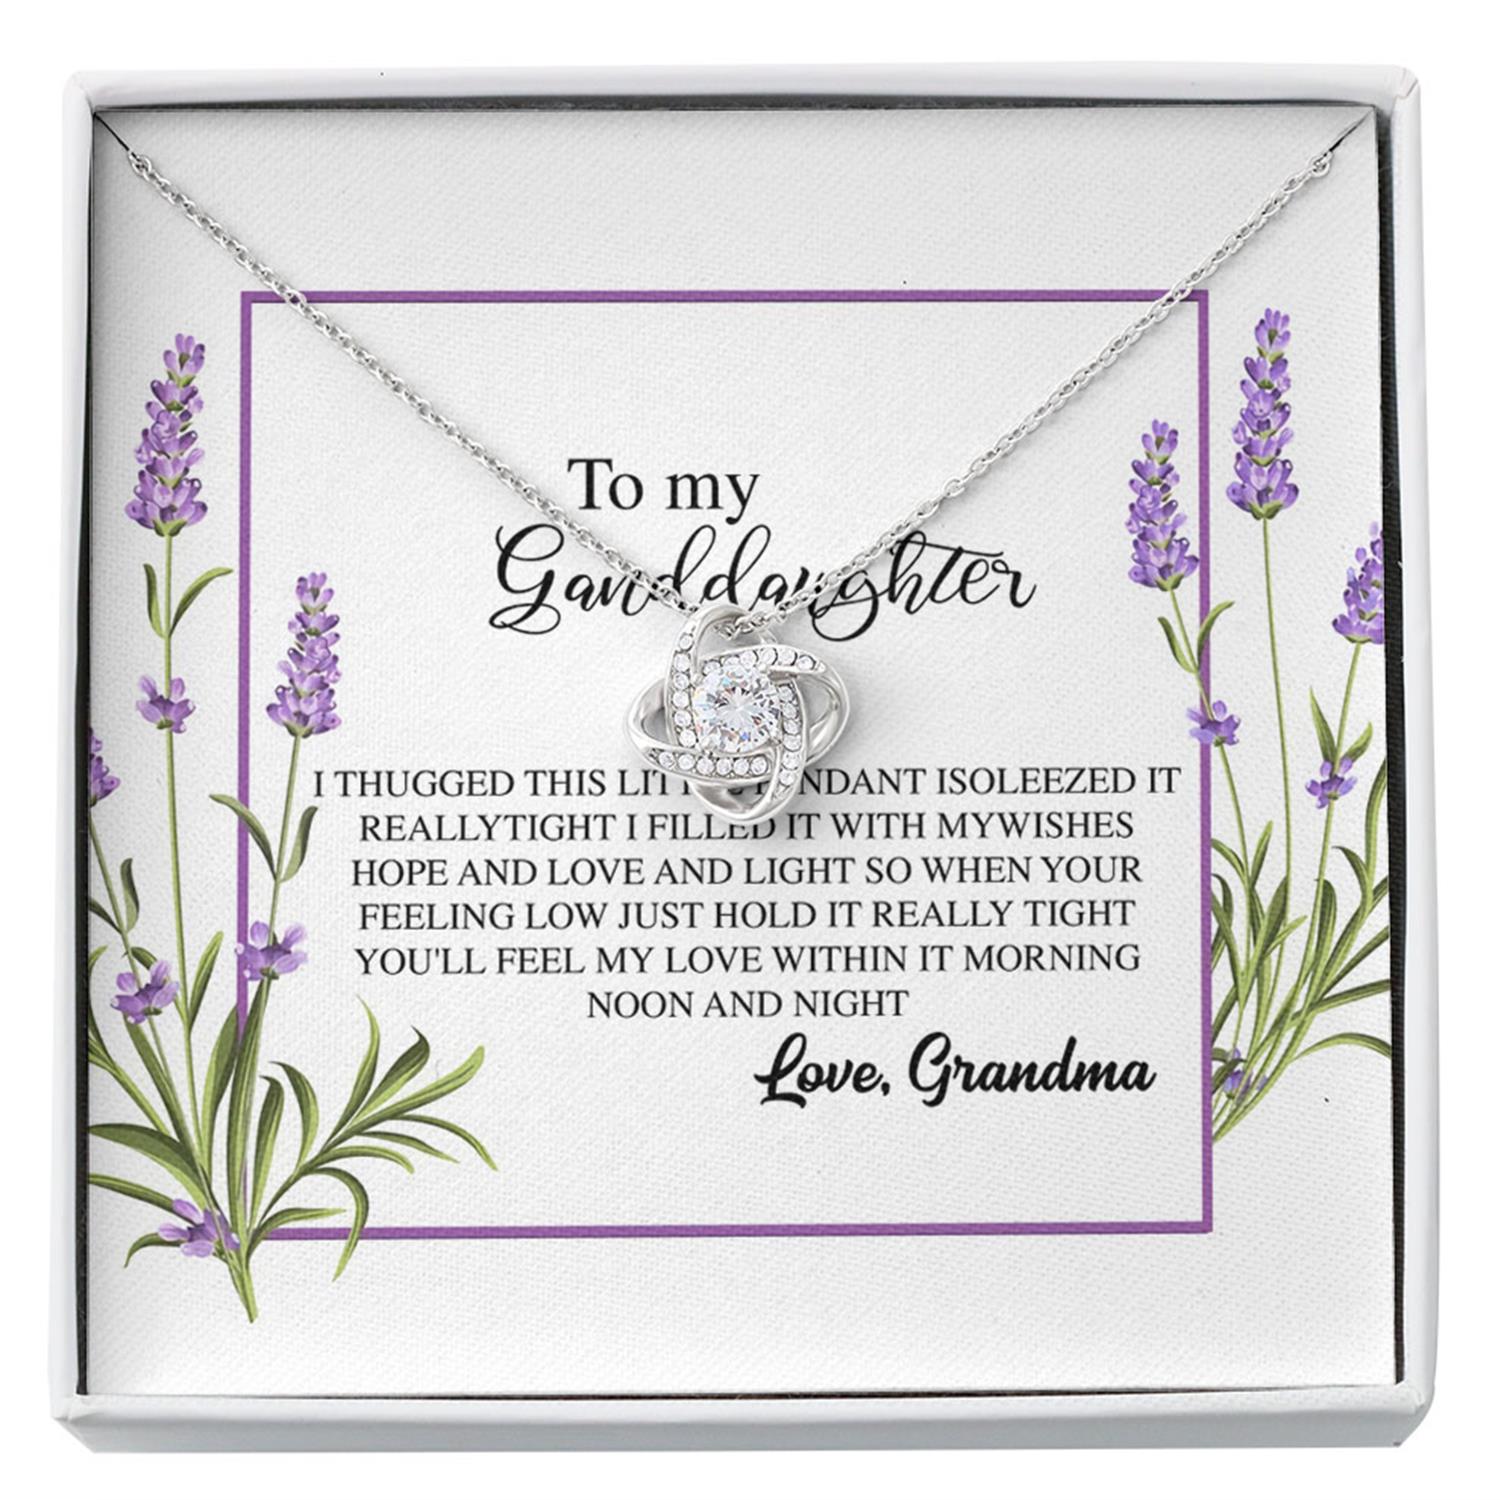 Granddaughter Necklace, To My Granddaughter Necklace Gift - I Hugged This Little Custom Necklace